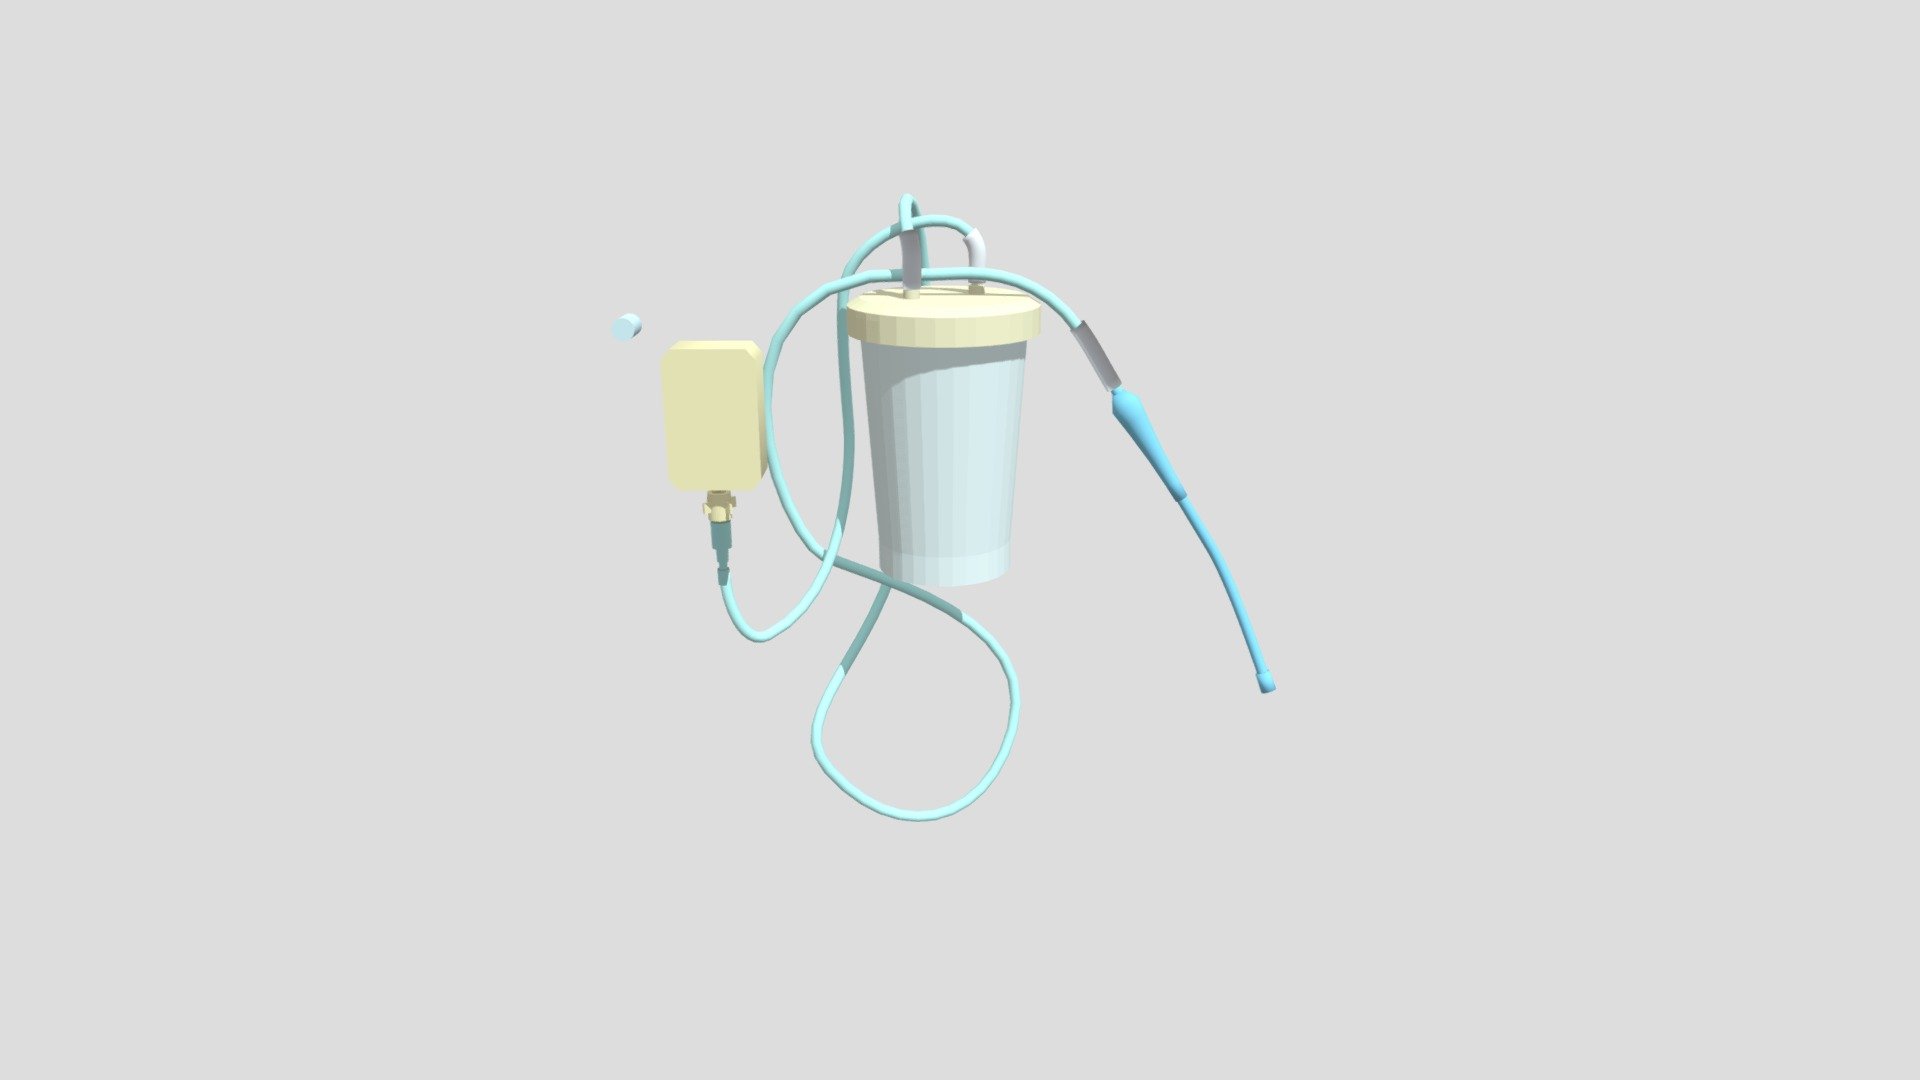 3D model of a suction canister found in a hospital room 3d model